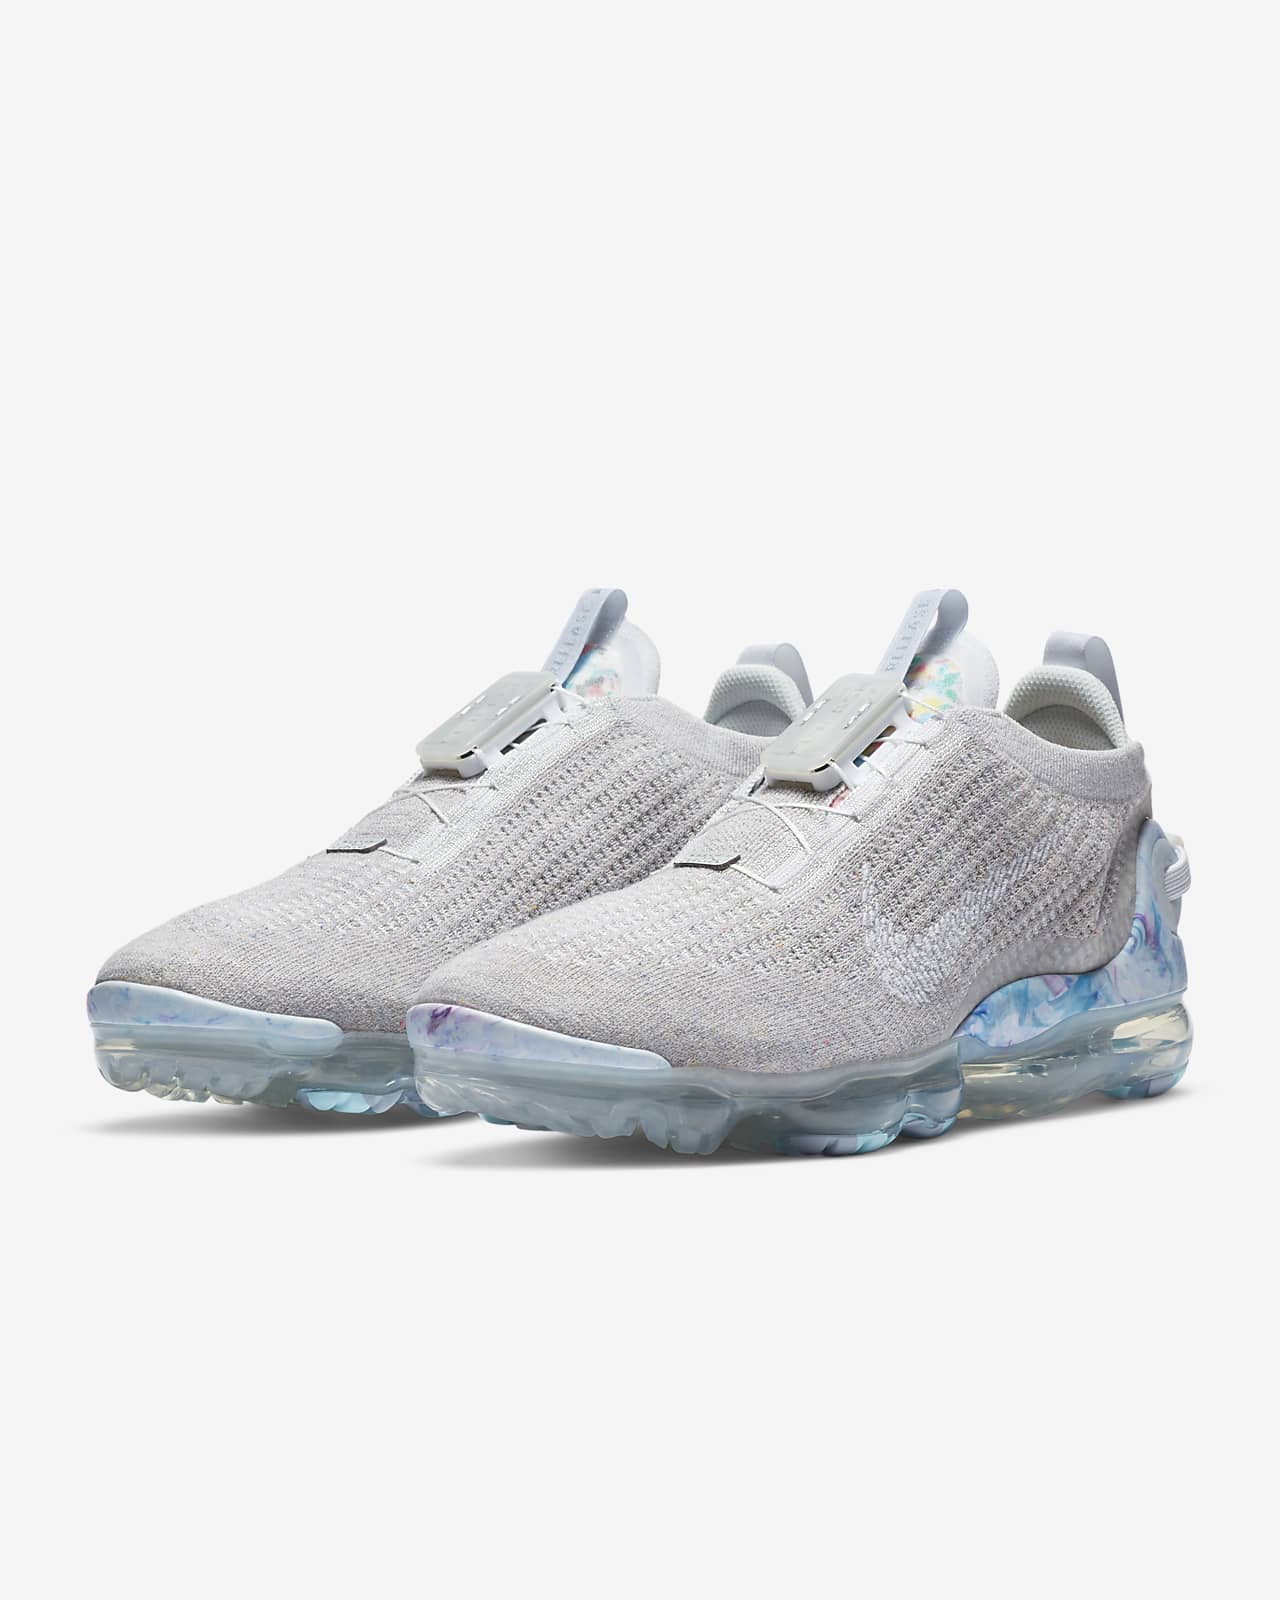 nike vapormax grey and white